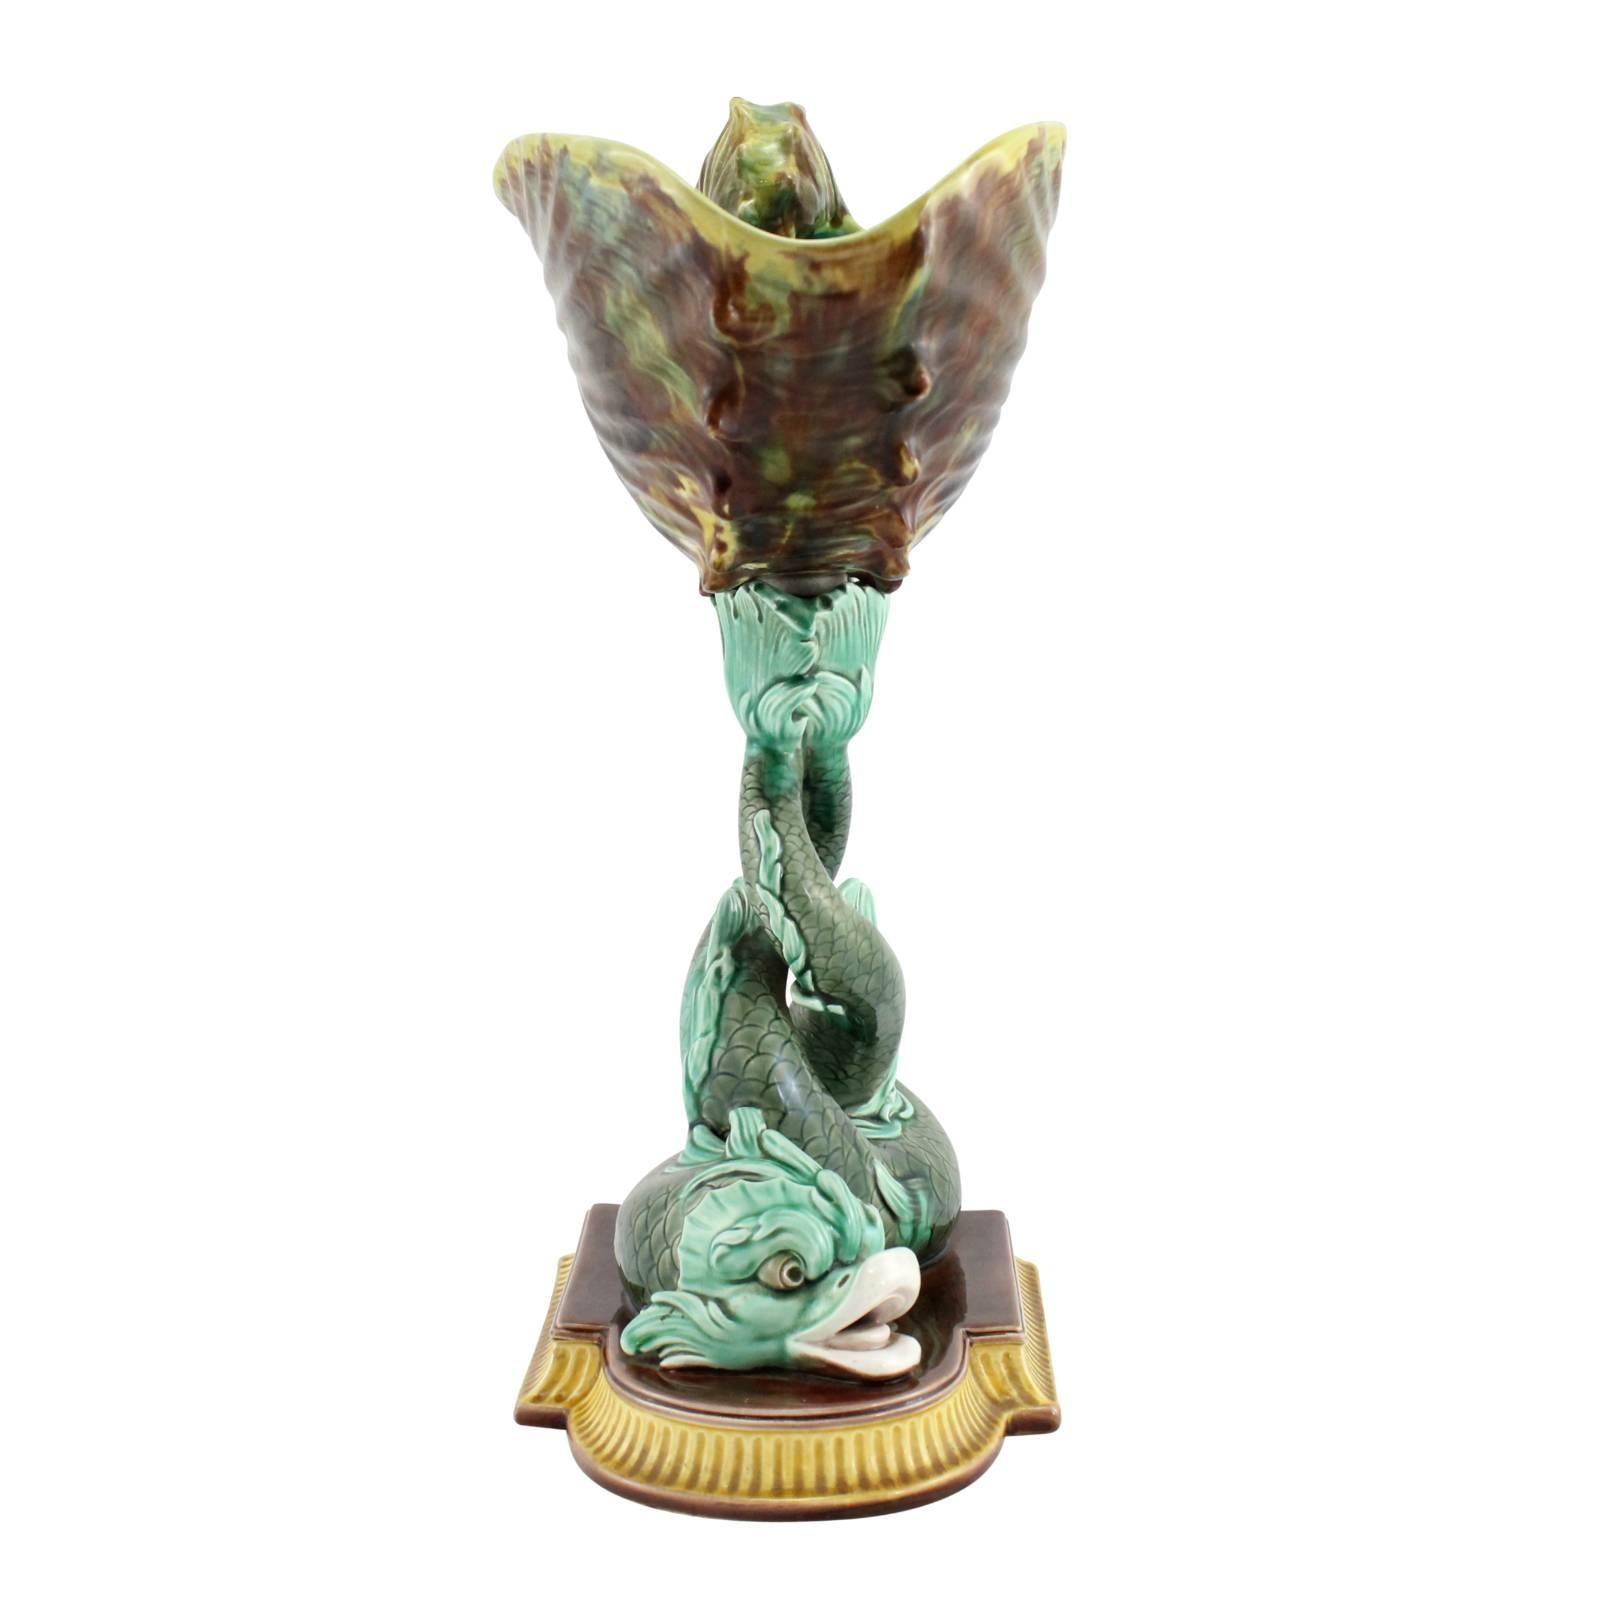 A large 19th century Wedgwood Majolica compote, in the form of two entwined dolphins supporting a nautilus shell with their tails. This refined centerpiece displays a great range of colors typical to Majolica ware at the time, such as Monte Carlo